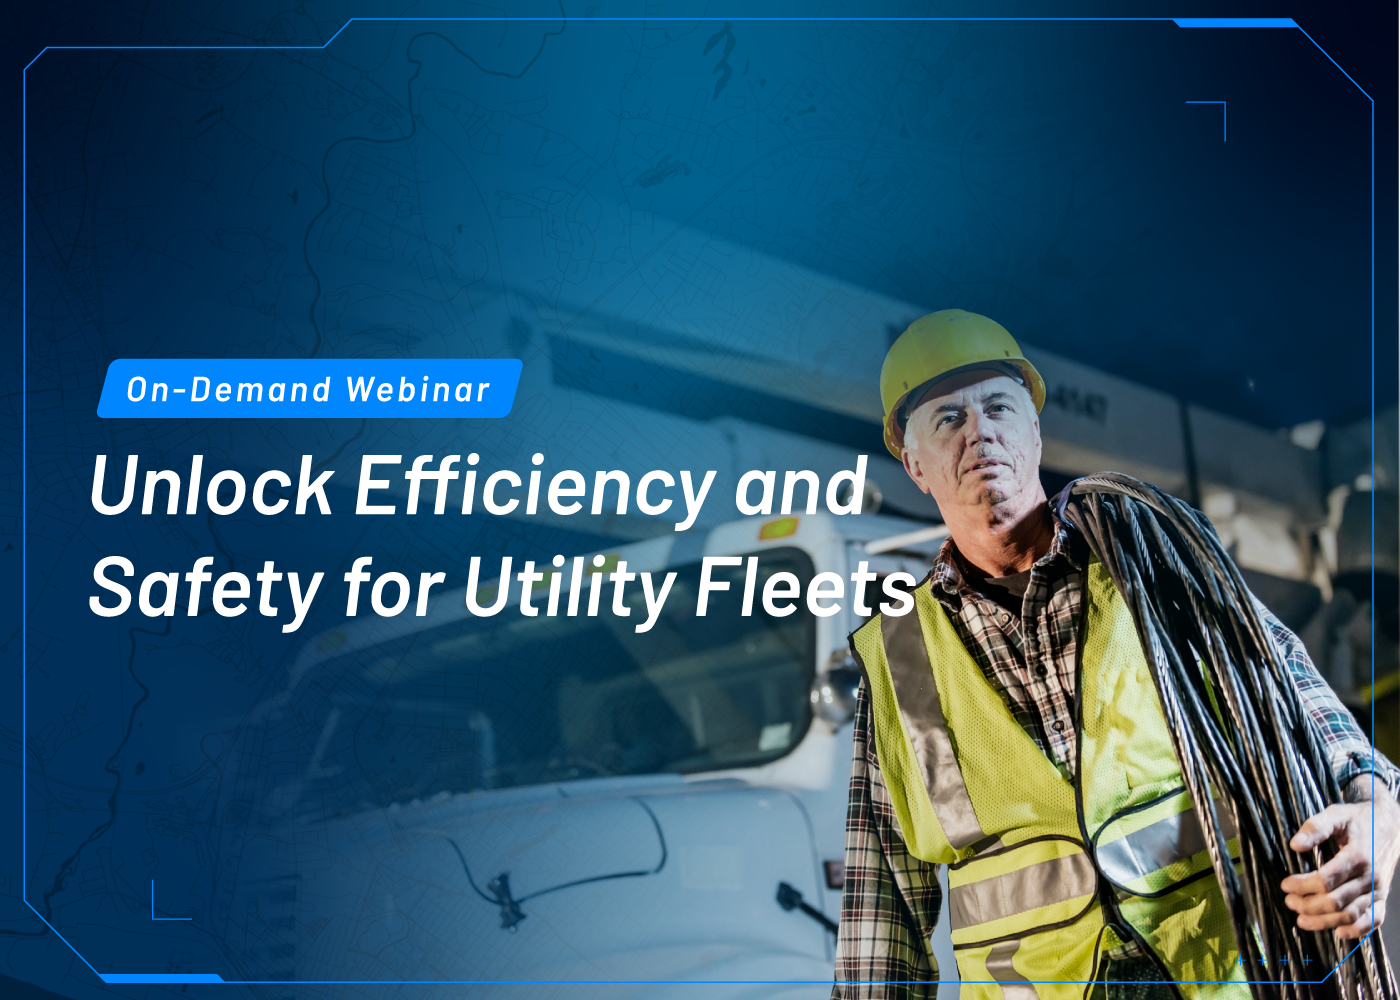 On-Demand Webinar: Unlock Efficiency and Safety for Utility Fleets